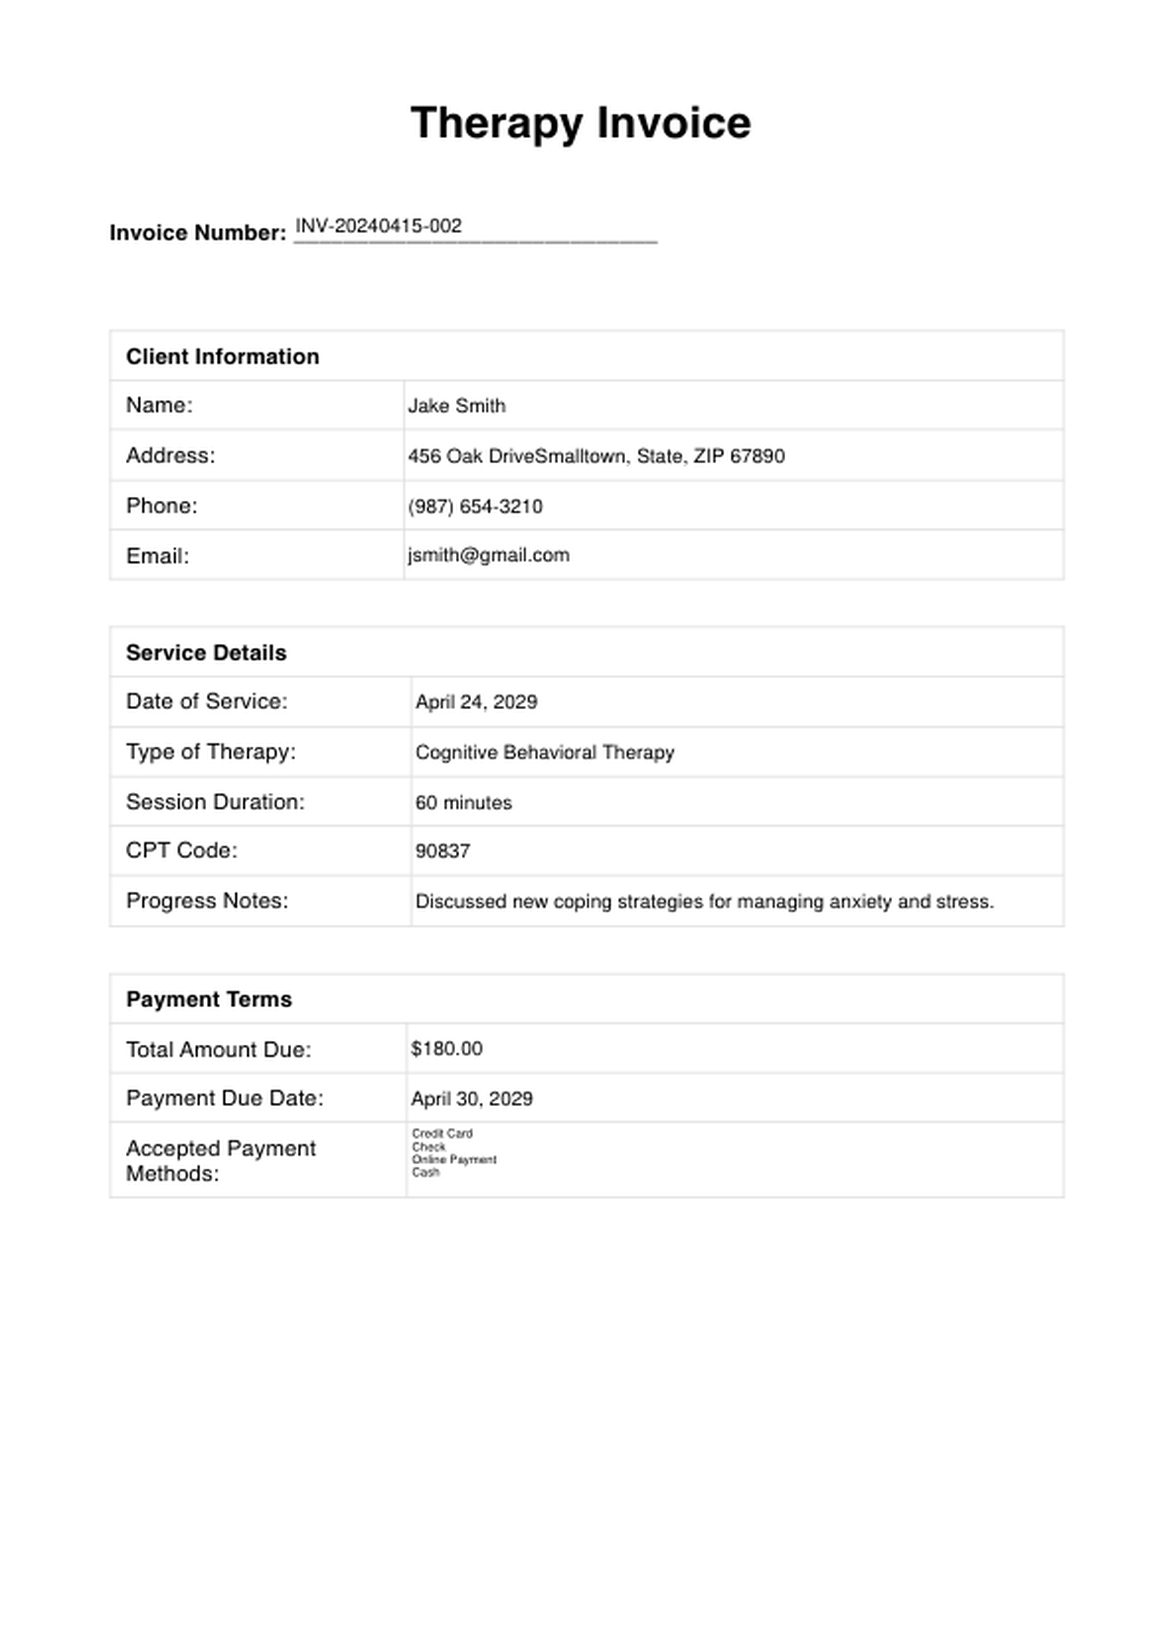 Therapy Invoice Template PDF Example